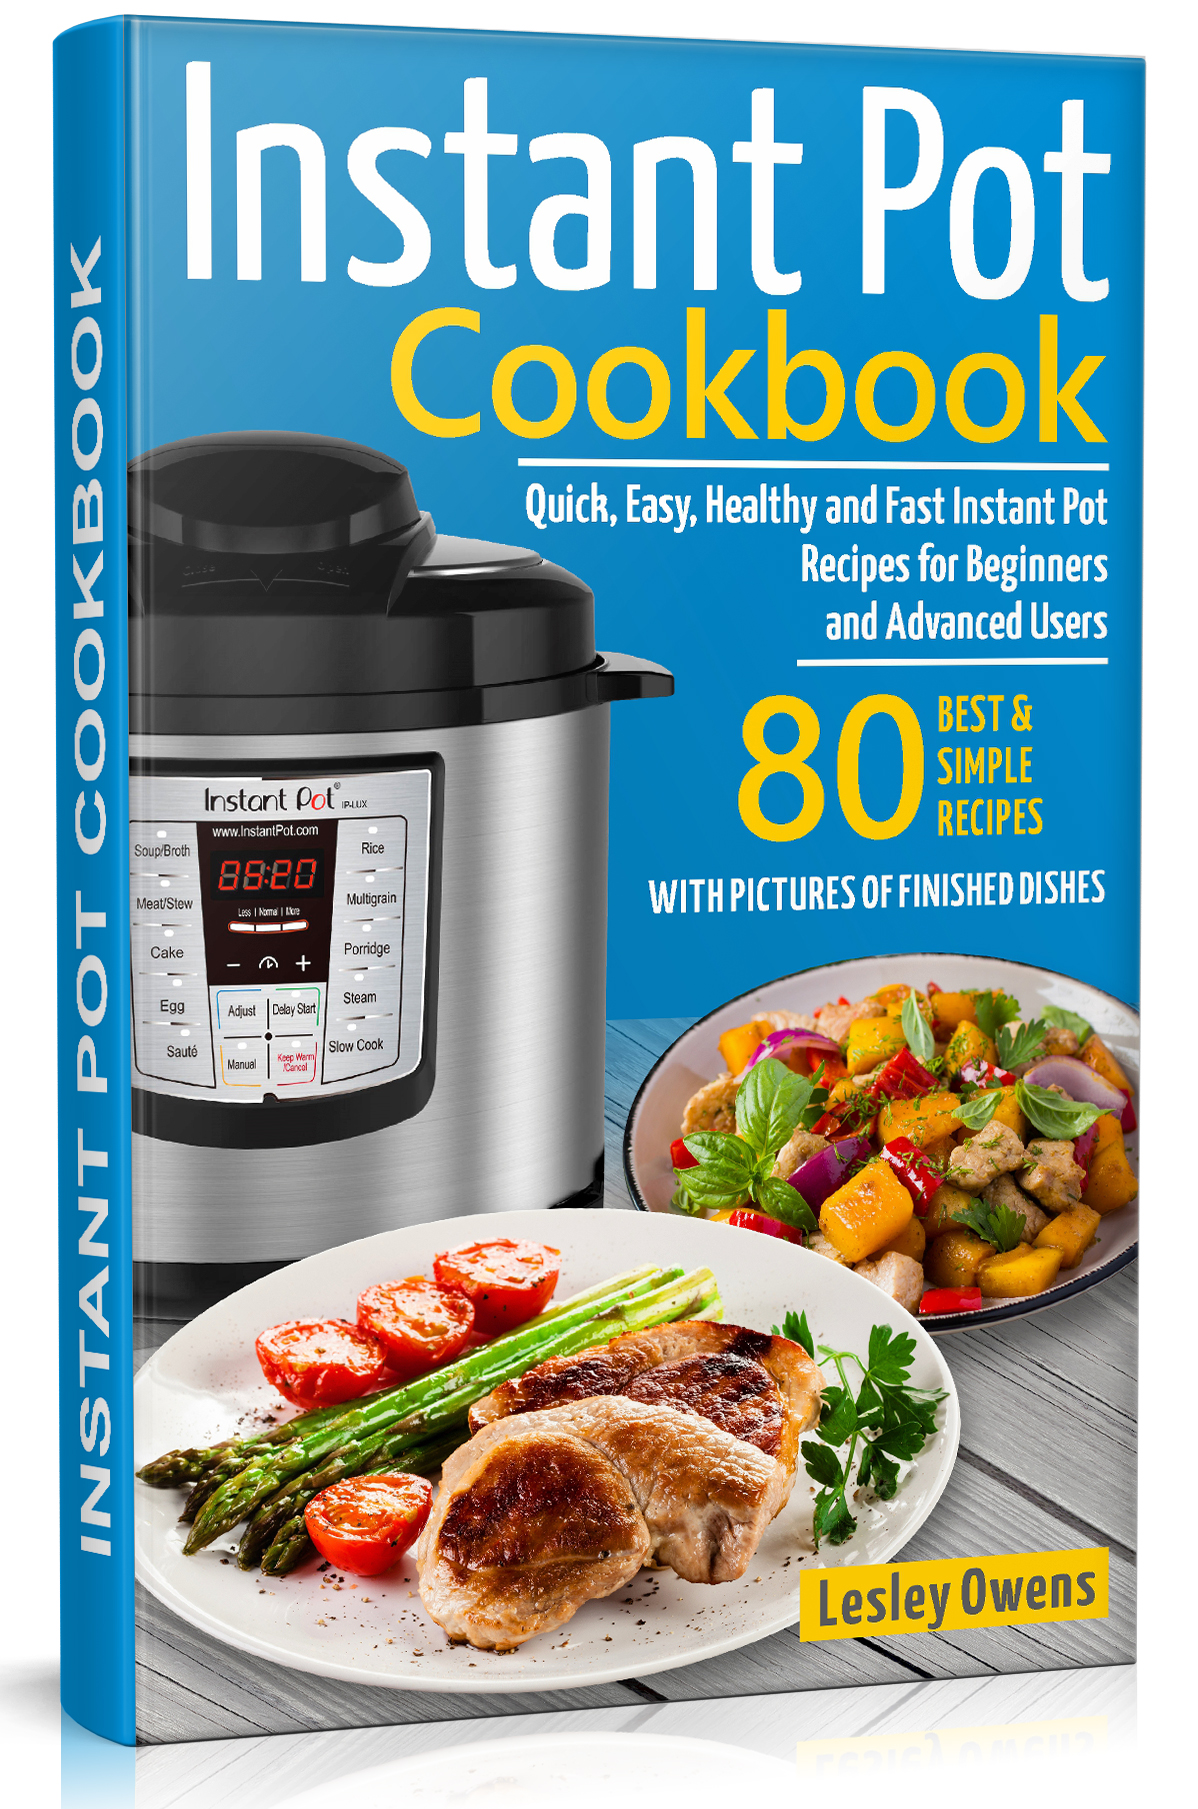 FREE: Instant Pot Cookbook: Quick, Easy, Healthy and Fast Instant Pot Recipes for Beginners and Advanced Users. 80 BEST AND SIMPLE RECIPES WITH PICTURES OF FINISHED DISHES by Lesley Owens